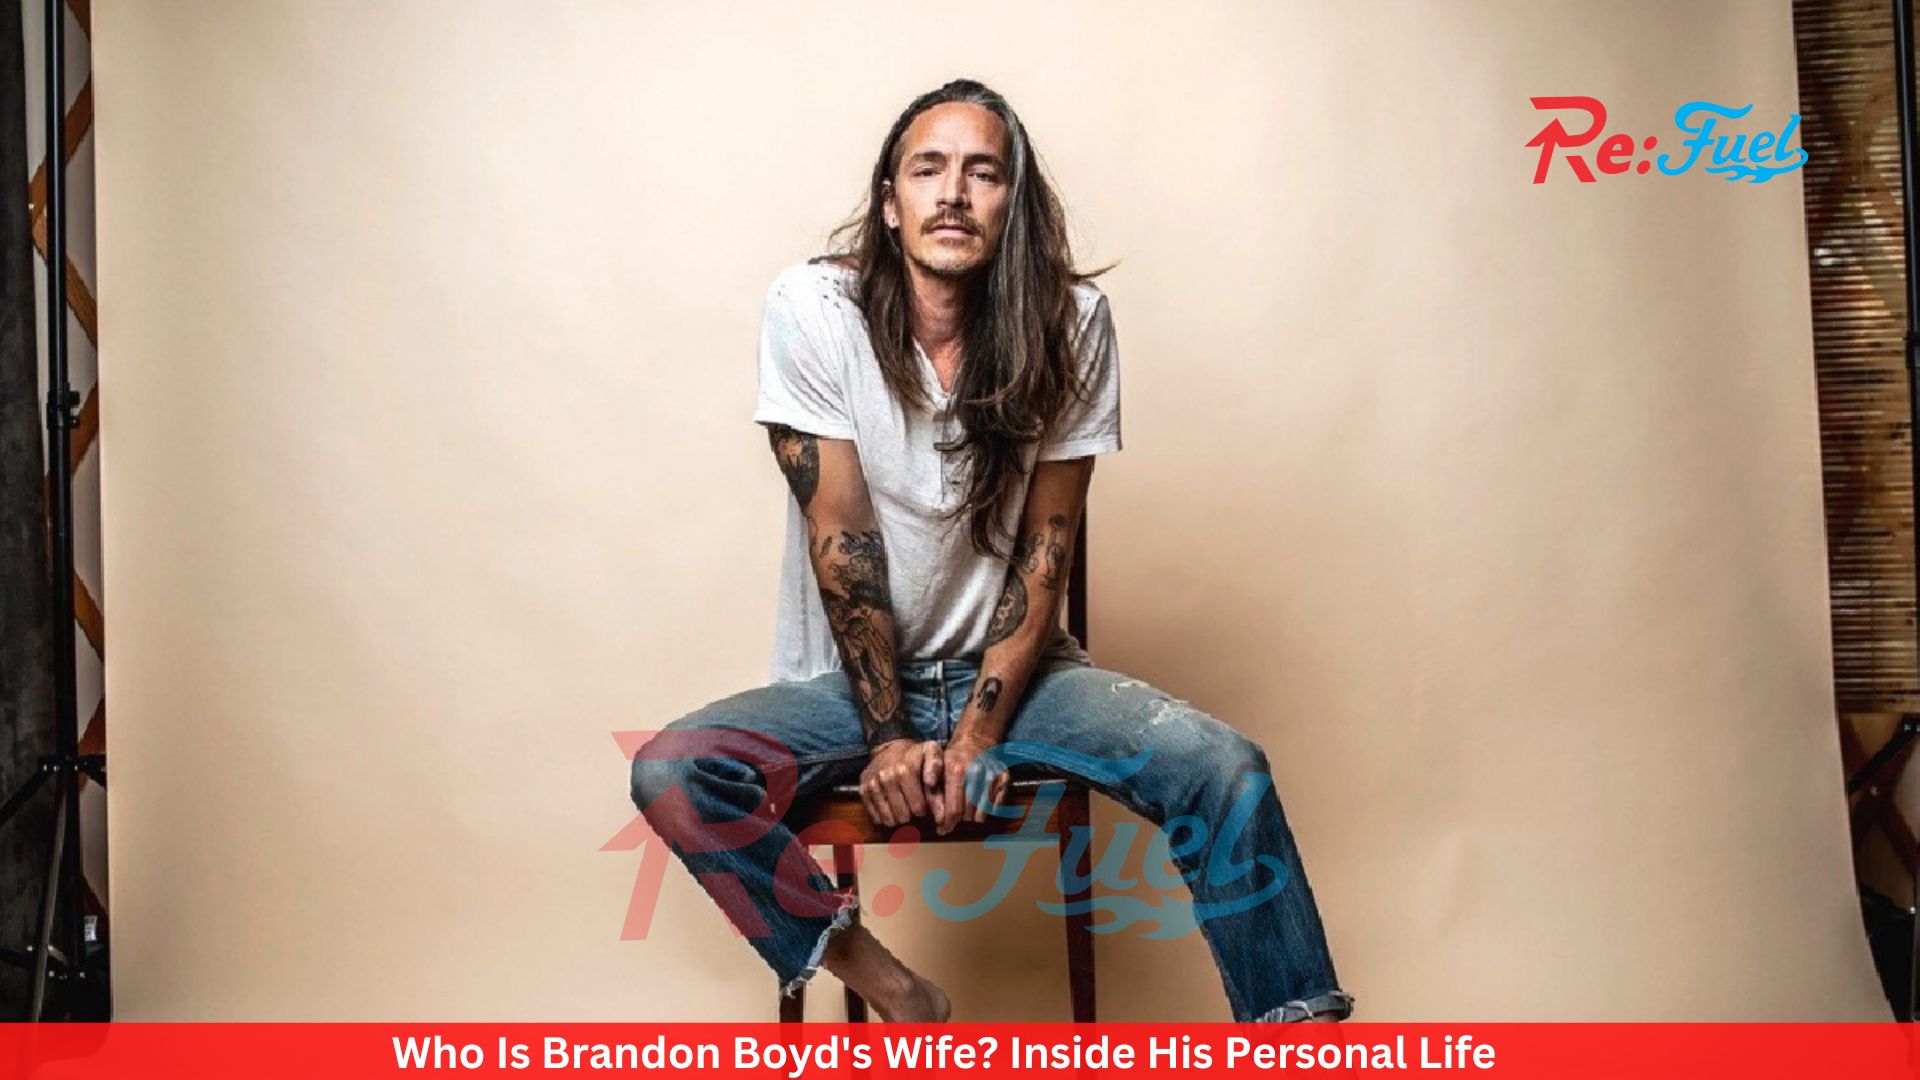 Who Is Brandon Boyd's Wife? Inside His Personal Life